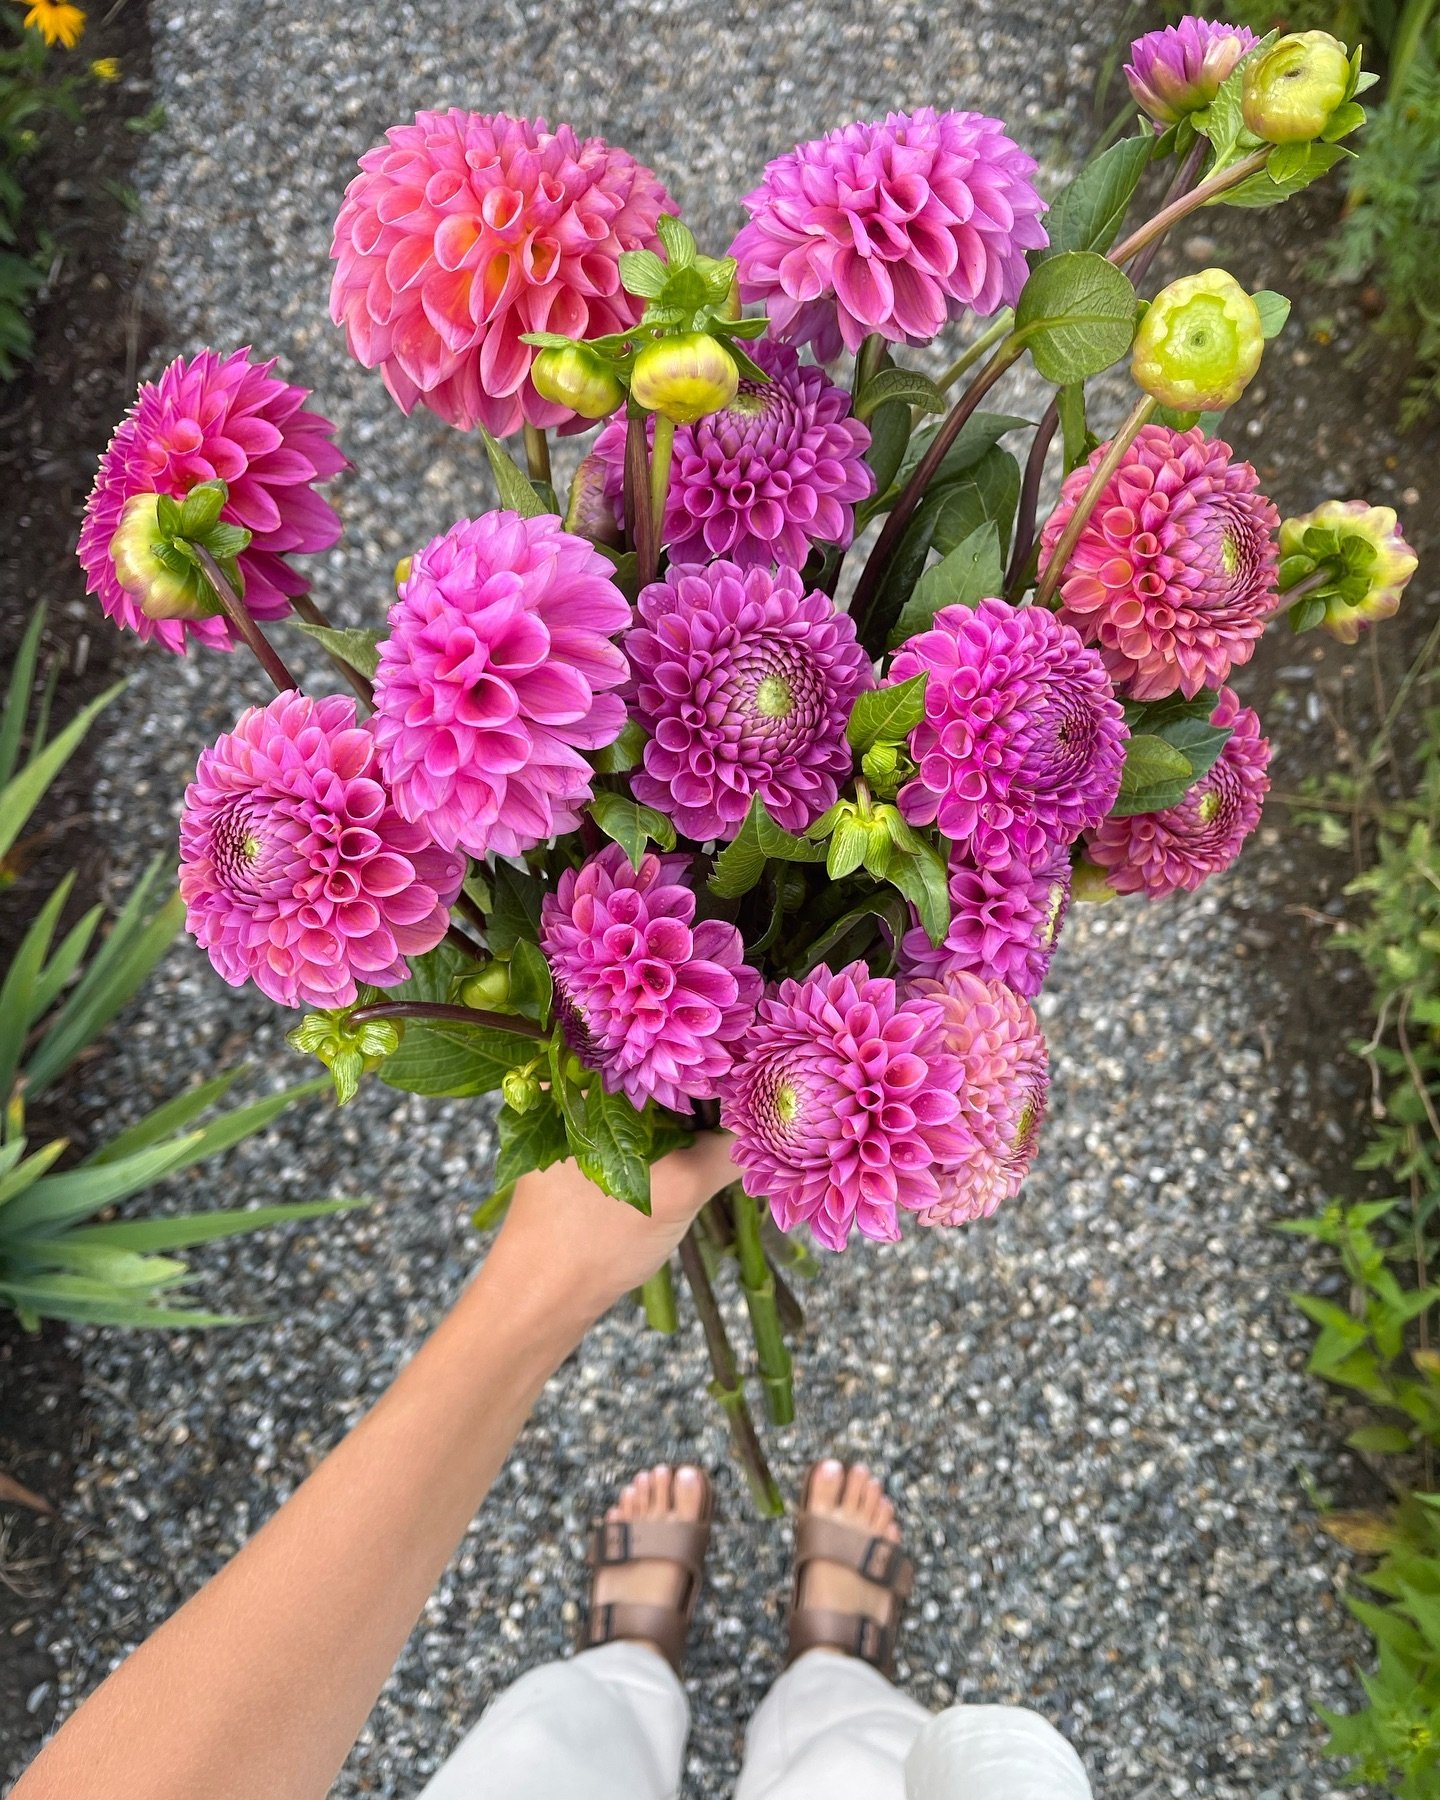 Last call for dahlia tubers! 🌸 The shop is going to be open for 1 more week, but will be closed starting May 1st, so if you&rsquo;ve been waiting to place an order this is your last chance for the year! There are 6 great variates left along with som